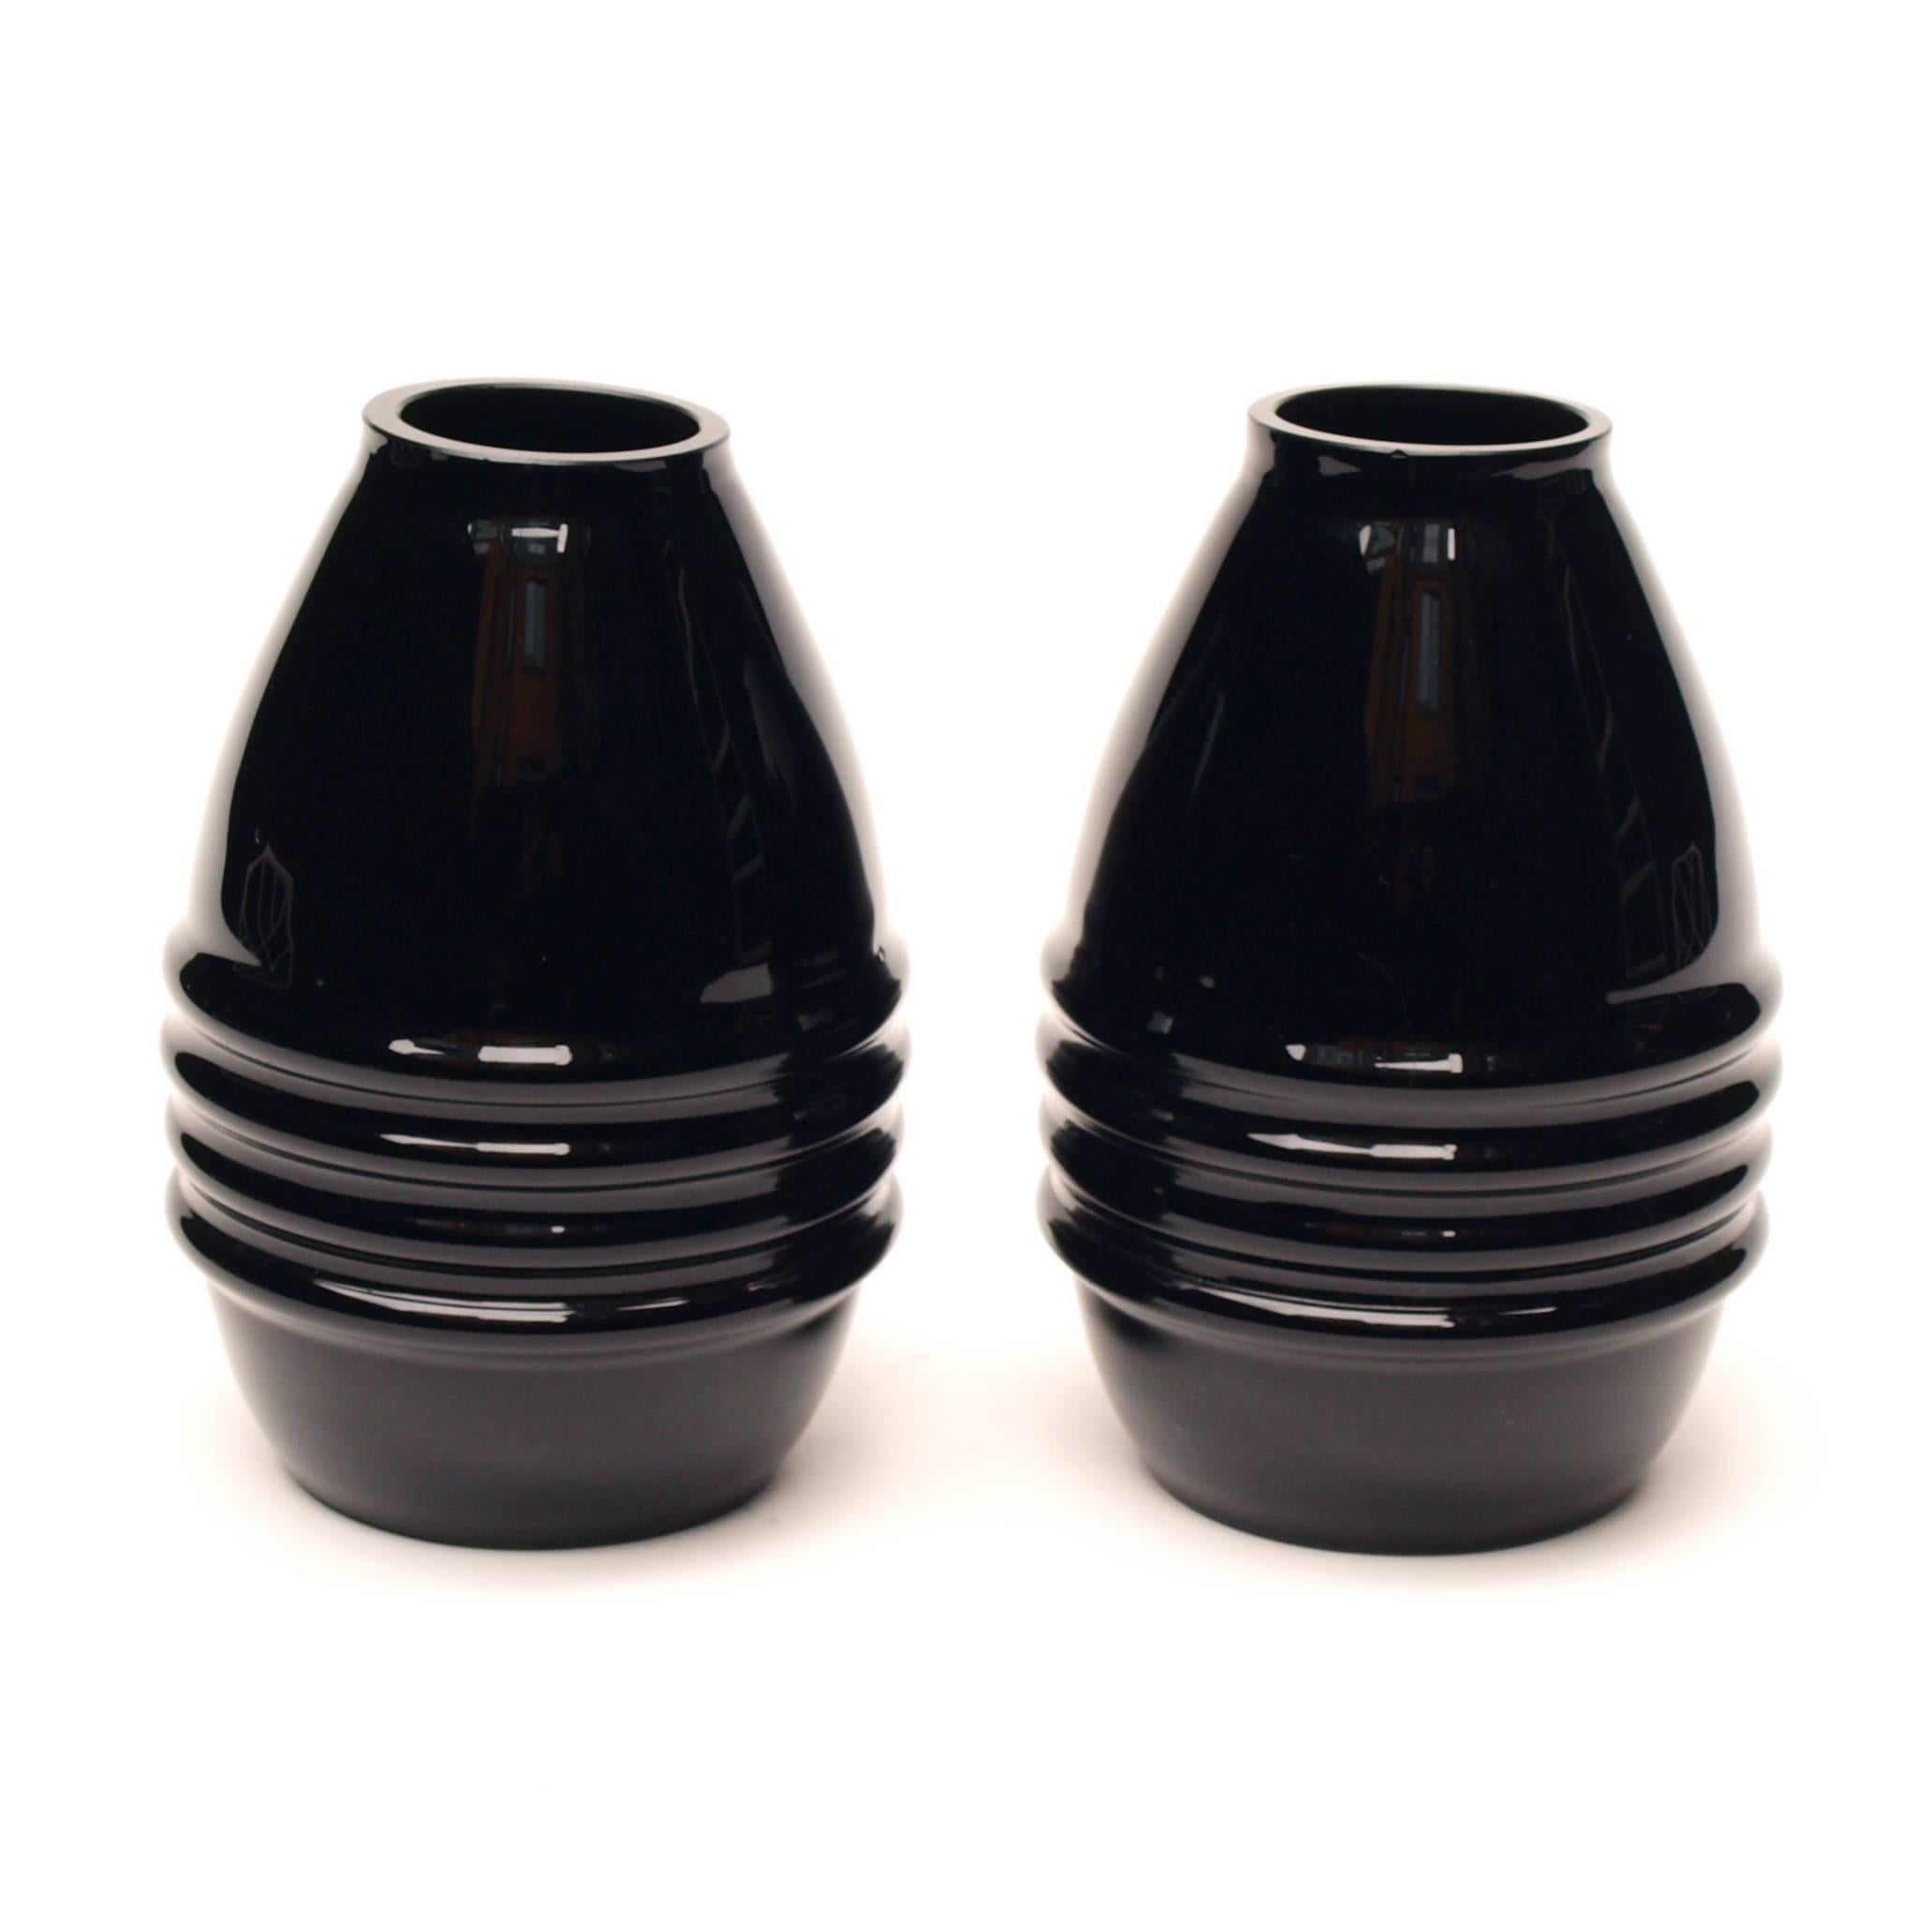 A simple pair of stunning black opaline vases from the 1930s attributed to Jacques Adnet.